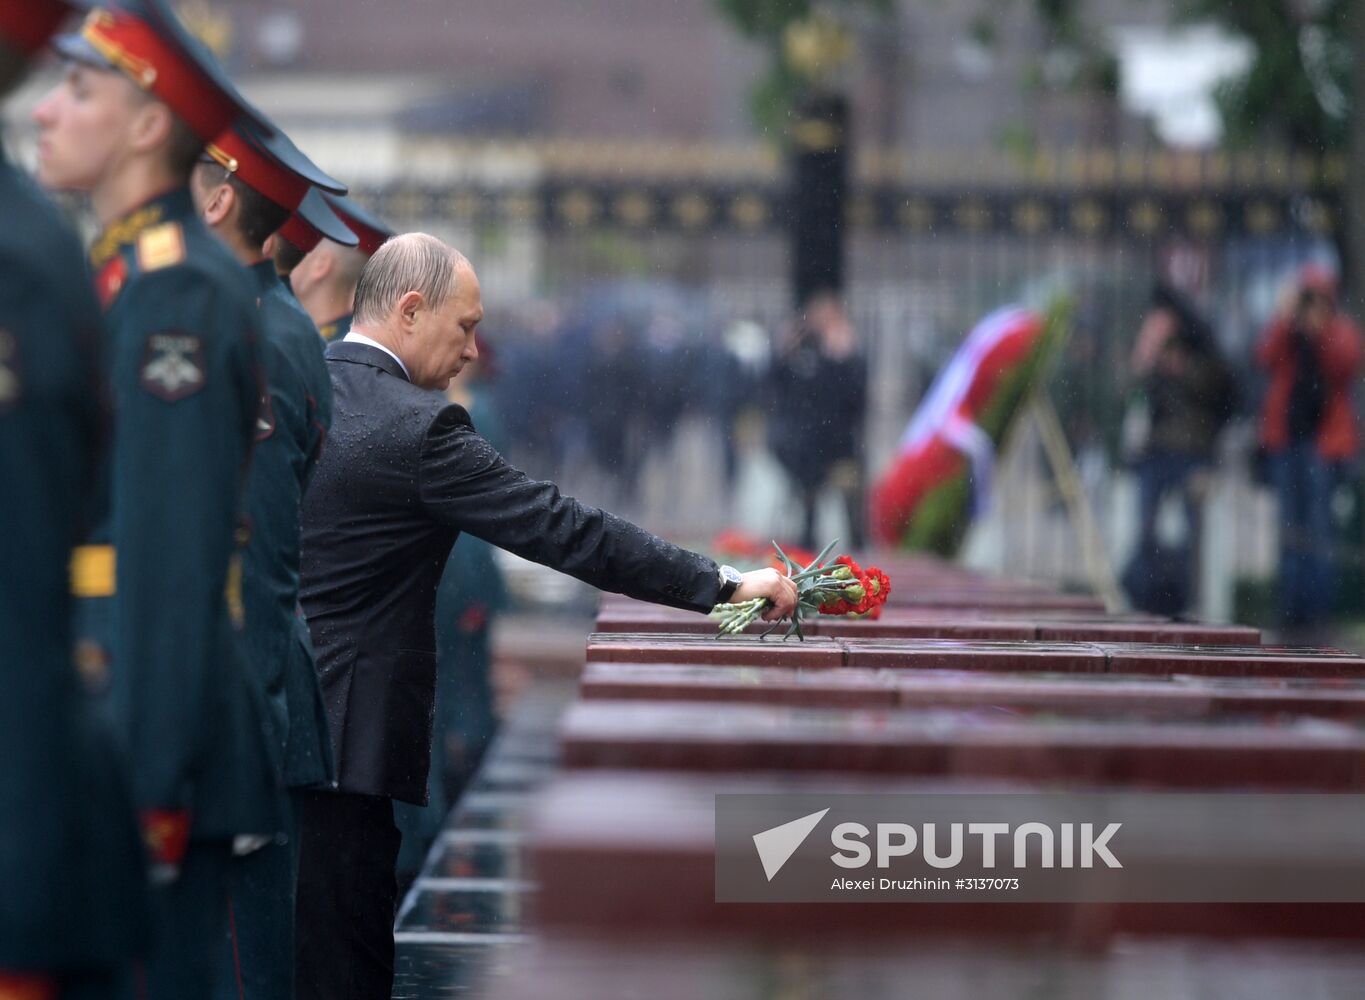 President Putin and Prime Minister Medvedev lay wreaths and flowers at Tomb of the Unknown Soldier in Alexander Garden